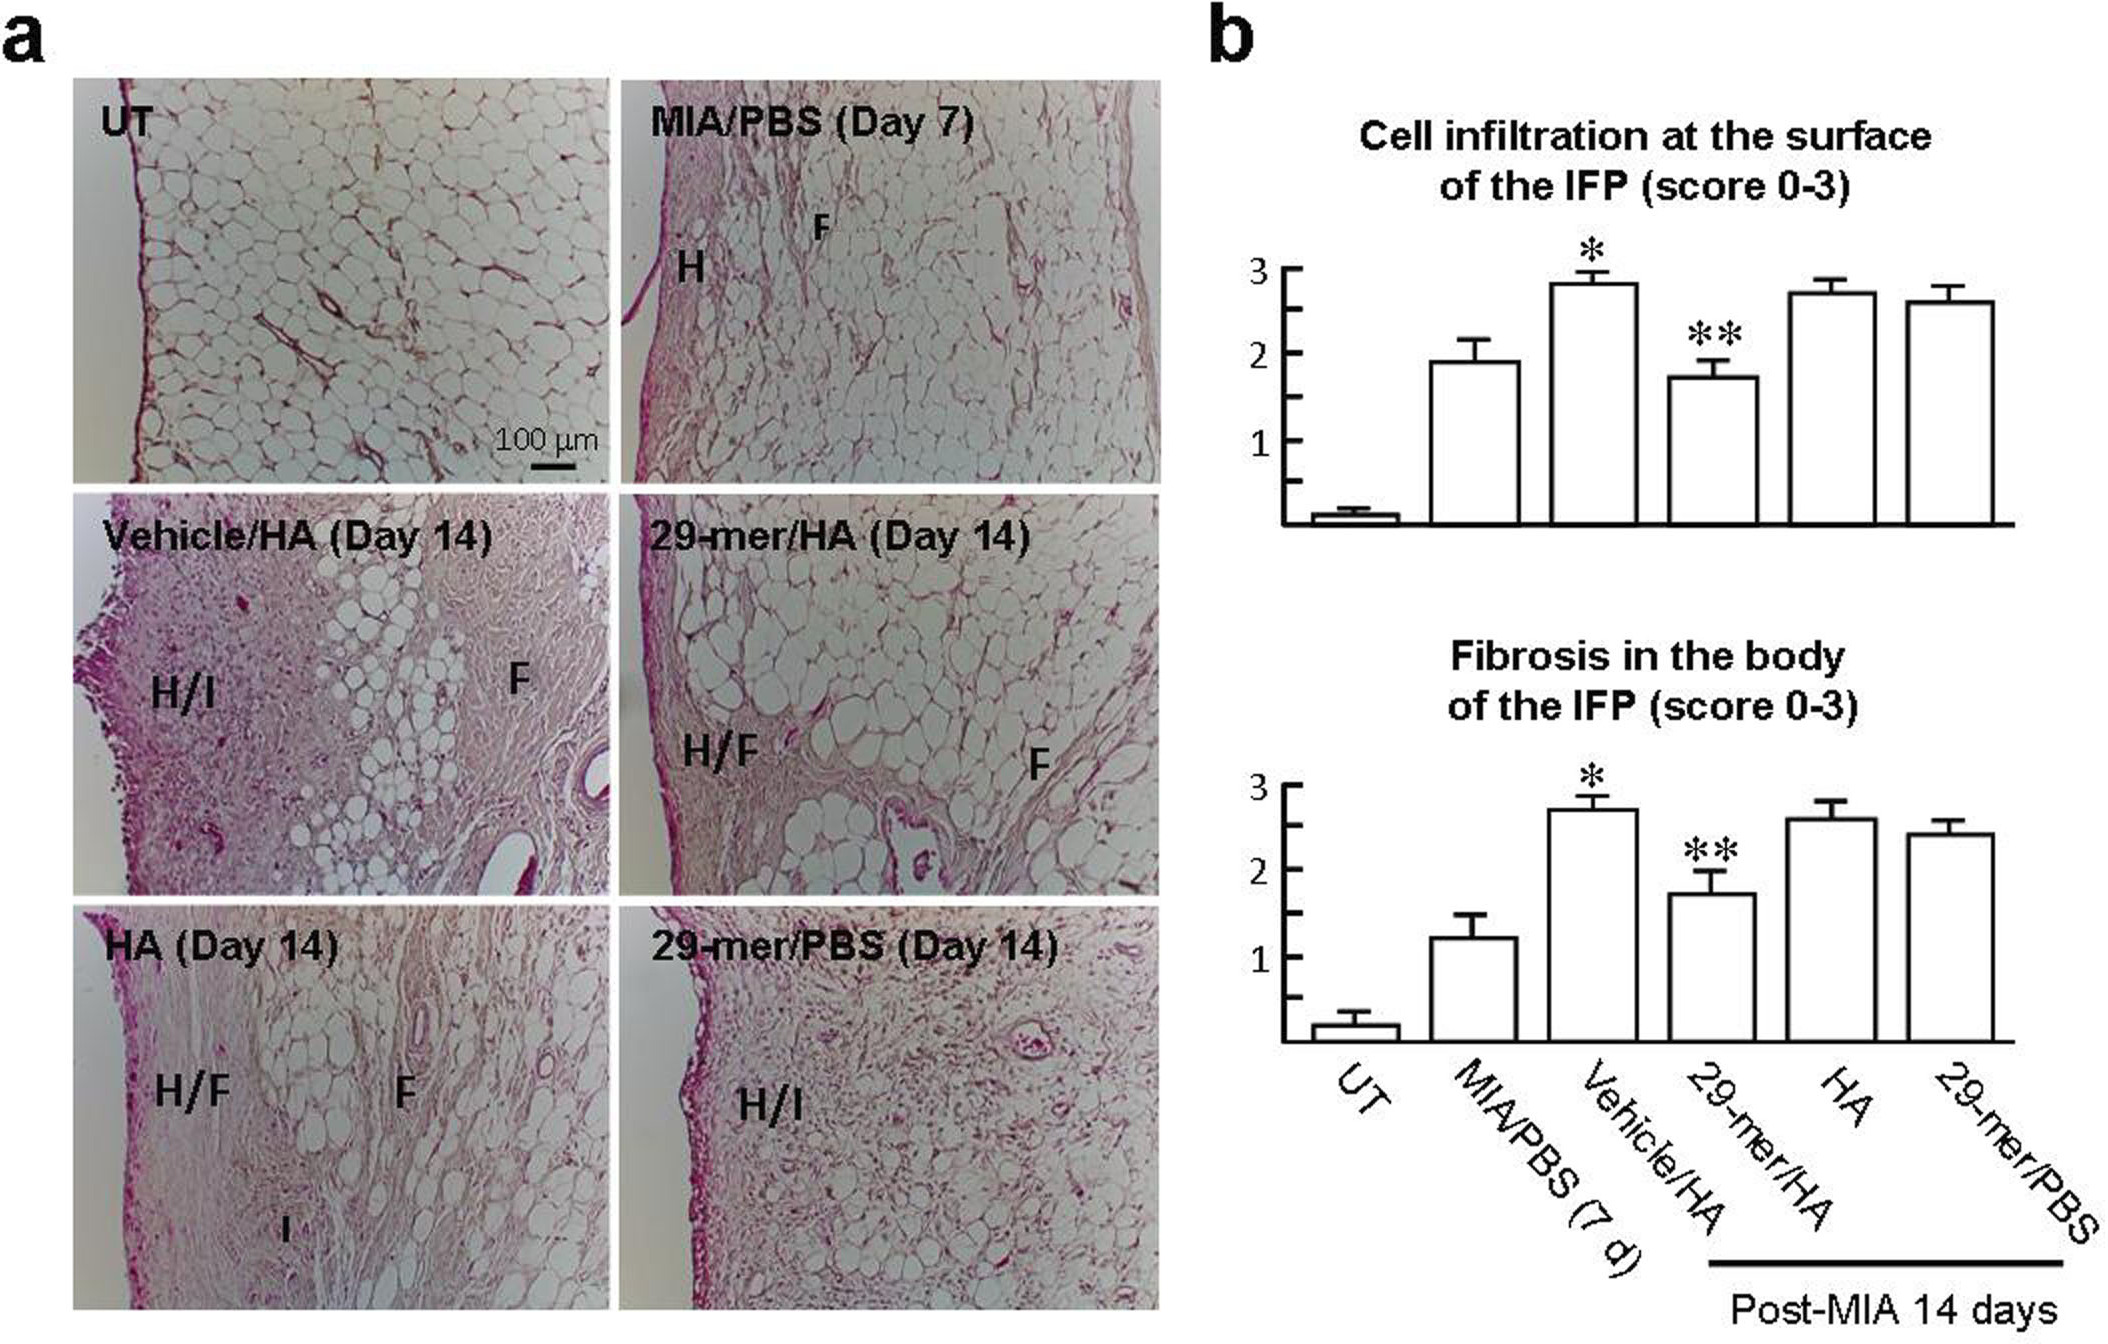 Fig. 4 
            The 29-mer/hyaluronic acid (HA) blocks the development of infrapatellar fat pad (IFP) inflammation induced by monosodium iodoacetate (MIA). a) Representative histological images of haematoxylin and eosin (H&E)-stained IFP in different experimental groups after MIA injection for seven and 14 days. b) IFP inflammation score was graded by the severity of cell infiltration and fibrosis in the IFP (n = 3 per group). All p-values in this figure were calculated using one-way analysis of variance. H, cellular hyperplastic response; I, cell infiltration; F, fibrotic deposits. *p < 0.001 vs MIA/PBS group. **p < 0.01 vs vehicle/HA group. PBS, phosphate-buffered saline; UT, untreated.
          